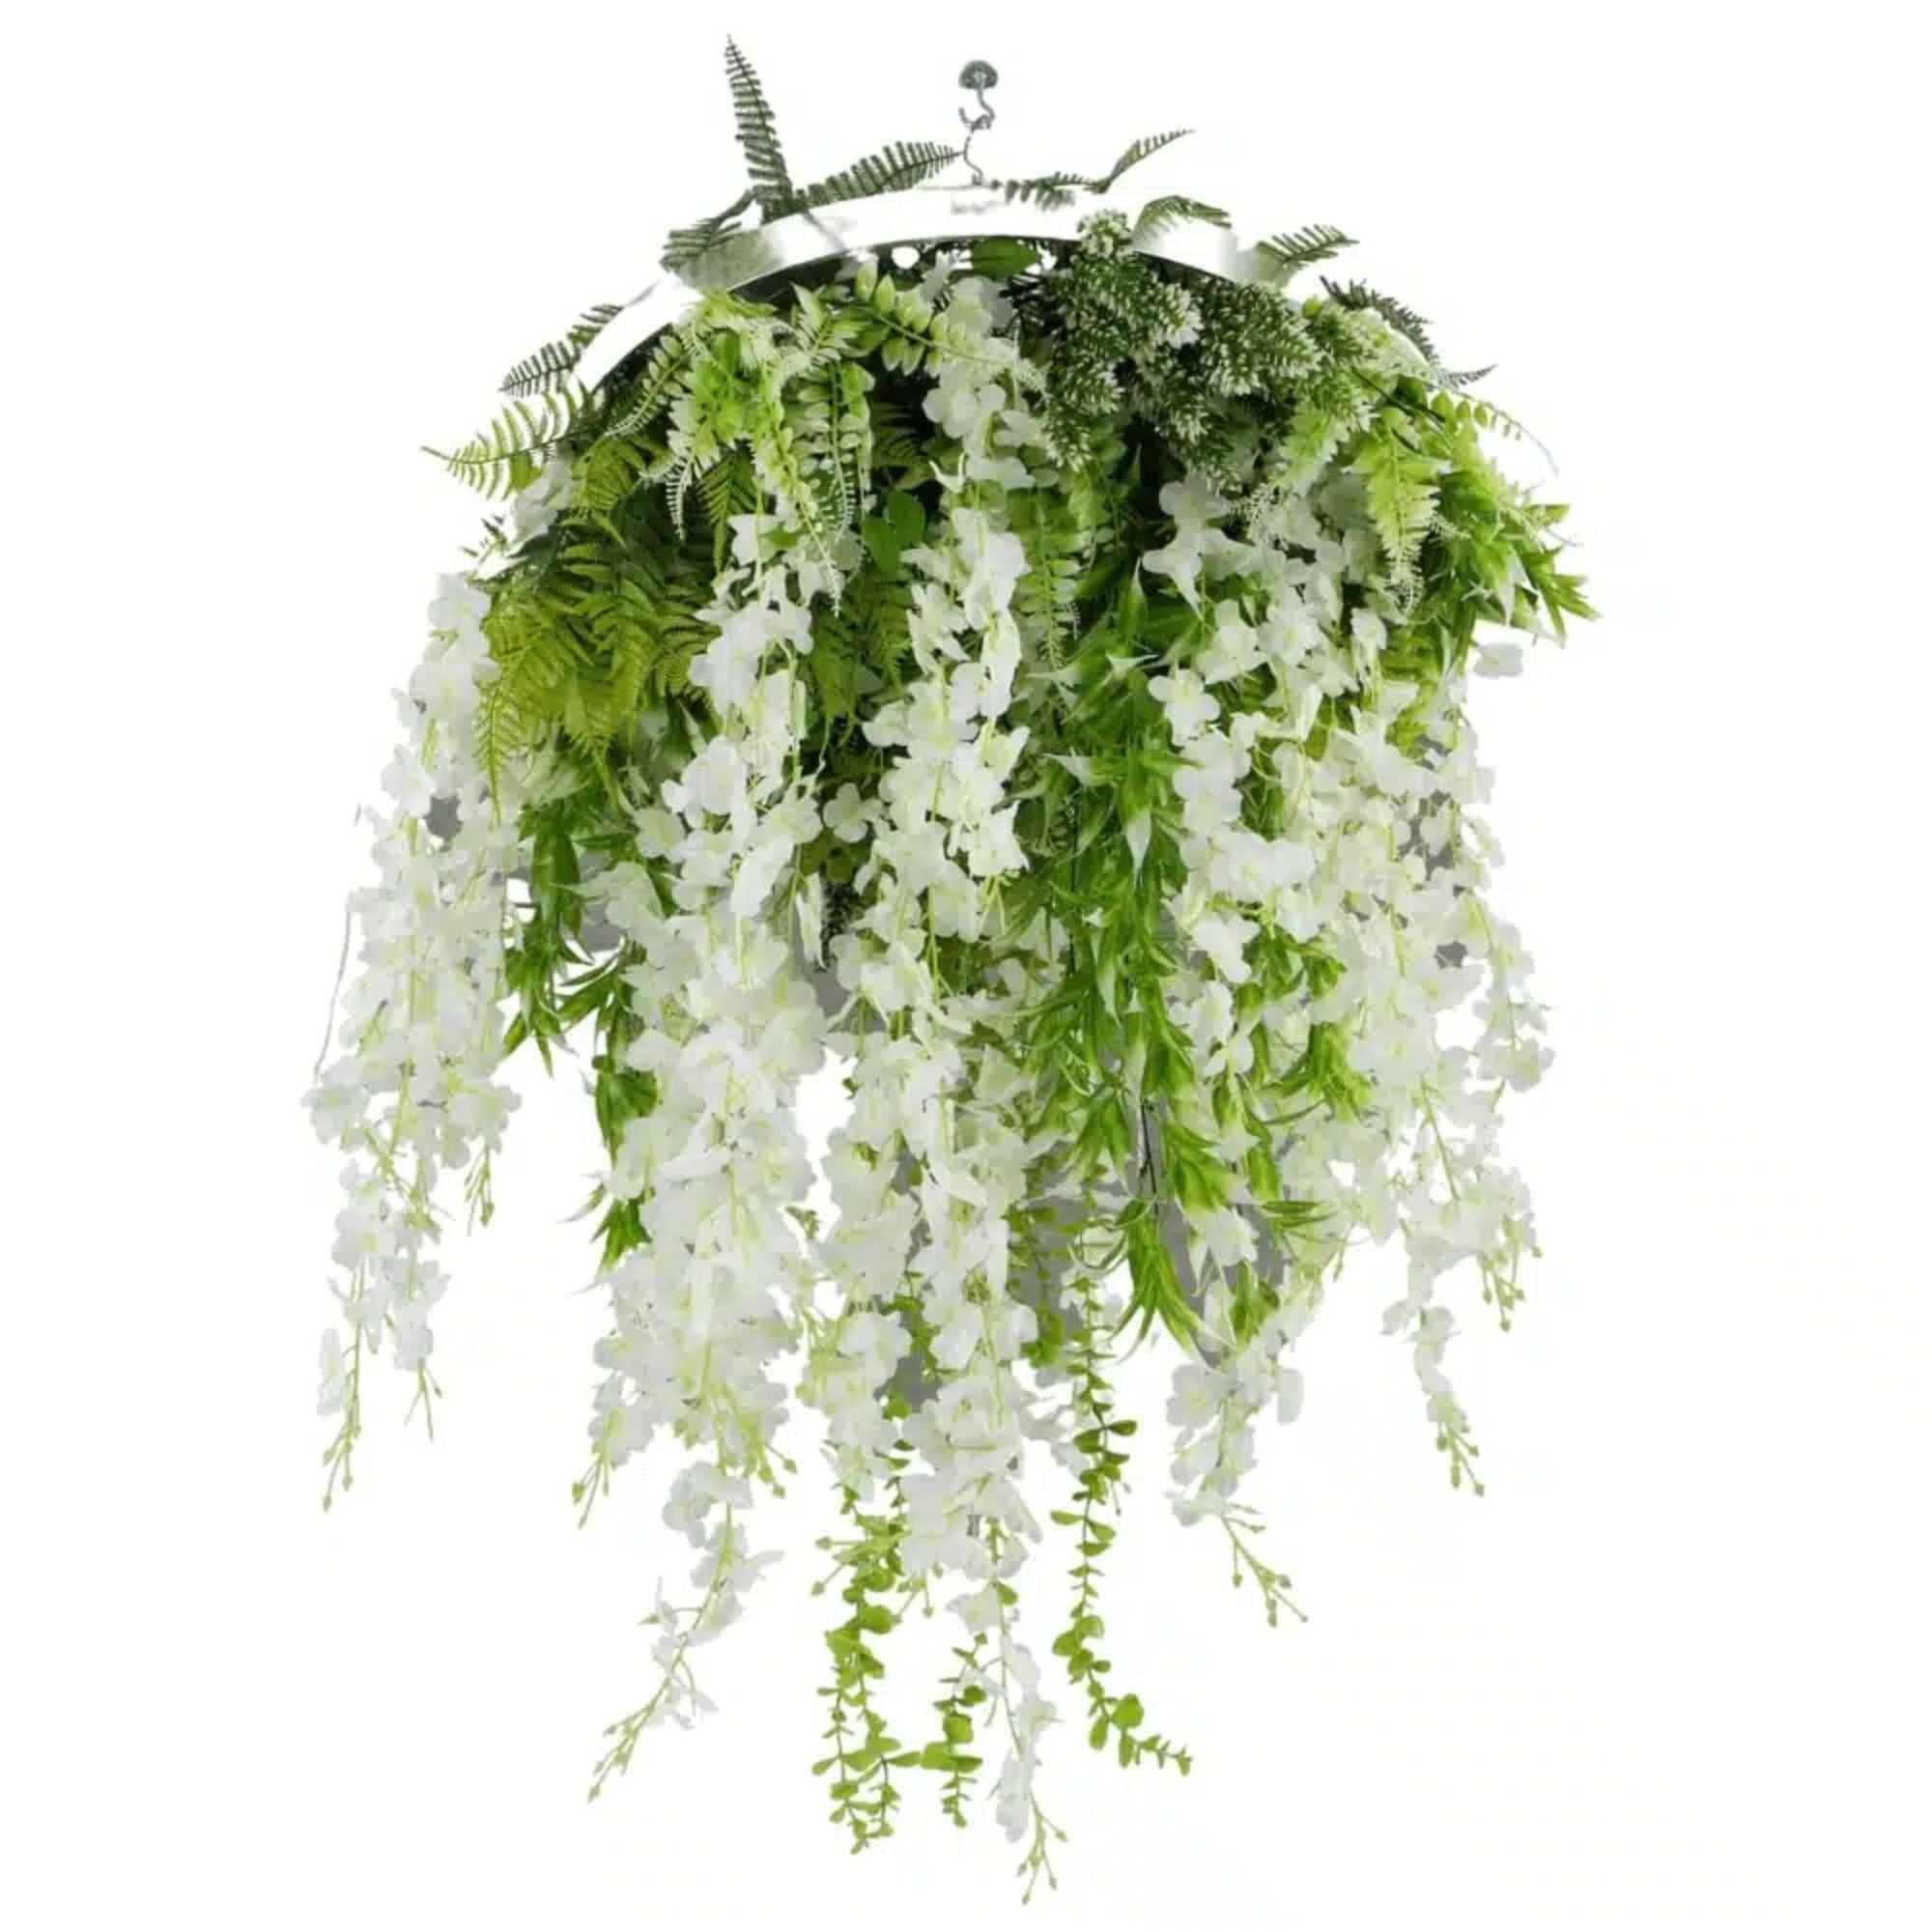 Silver Framed Roof Hanging Disc With Draping Life-Like Wisteria Flowers 60cm - Designer Vertical Gardens Artificial vertical garden wall disc hanging plants